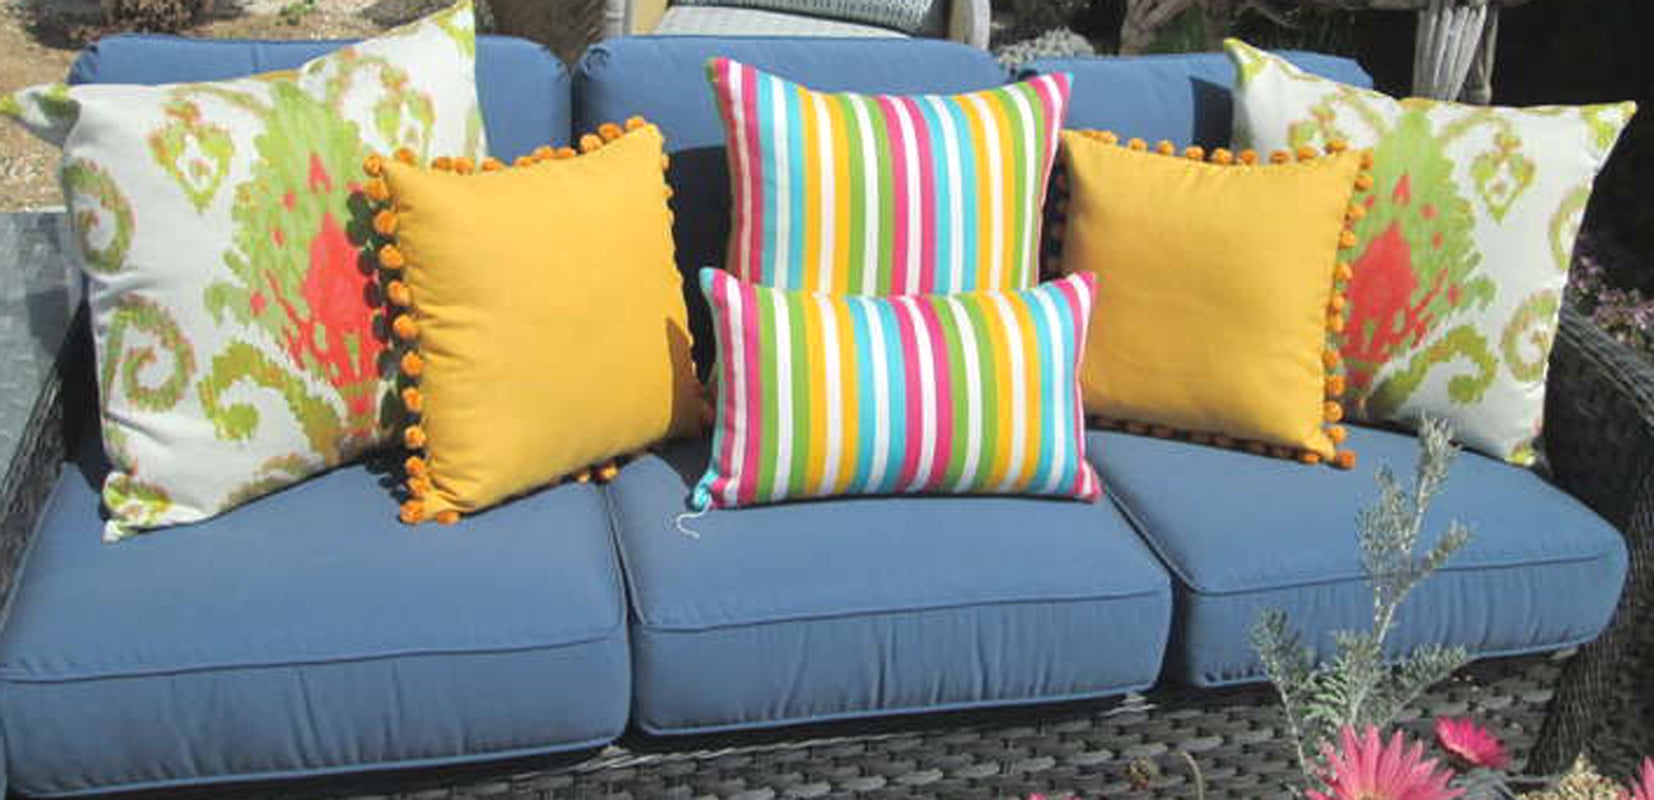 Decorative Outdoor Pillows For Sale